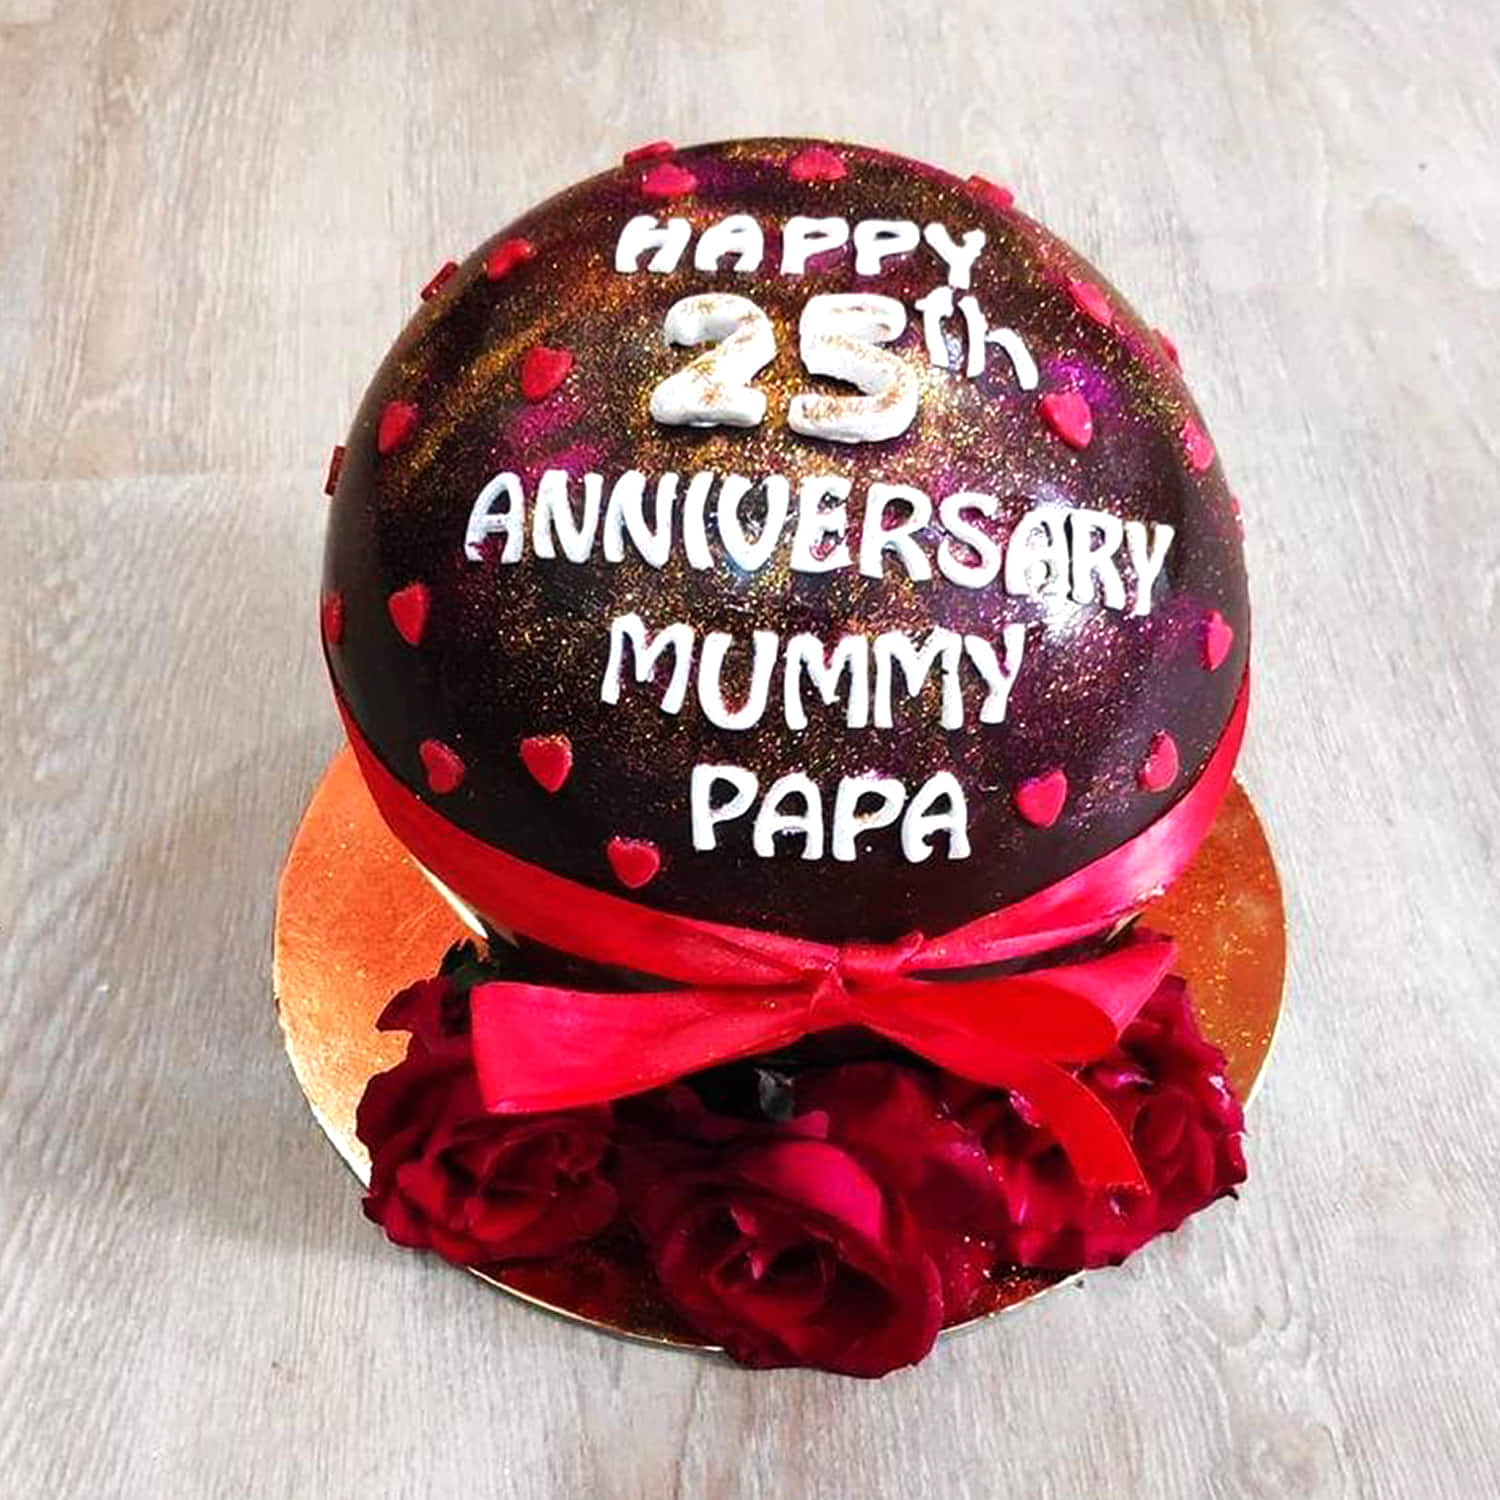 Buy/Send 25th Anniversary Cake for Parents Online - Silver Jubilee Cake